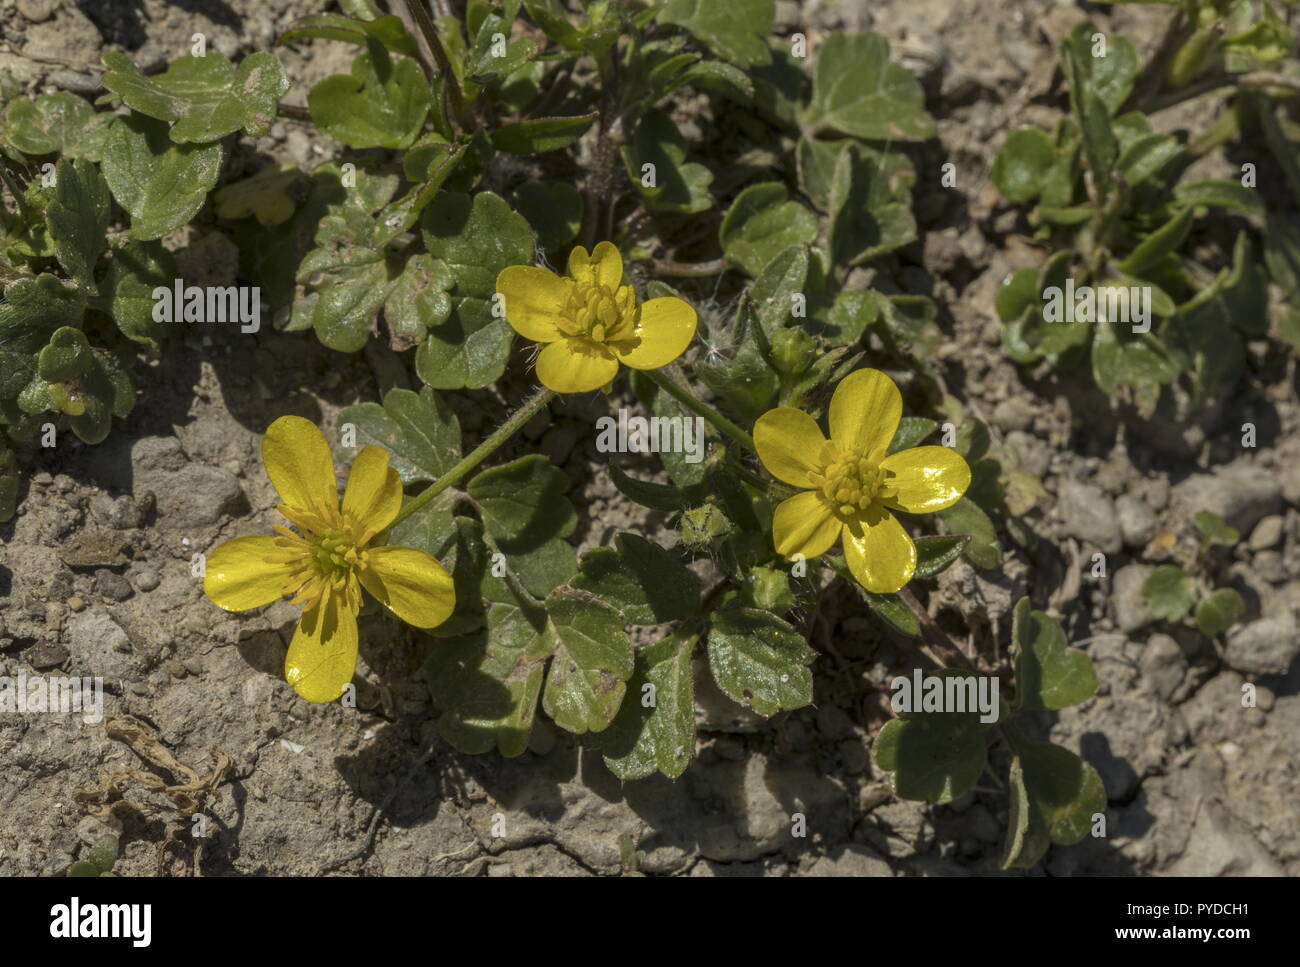 Hairy buttercup, Ranunculus sardous, in flower in spring. Stock Photo